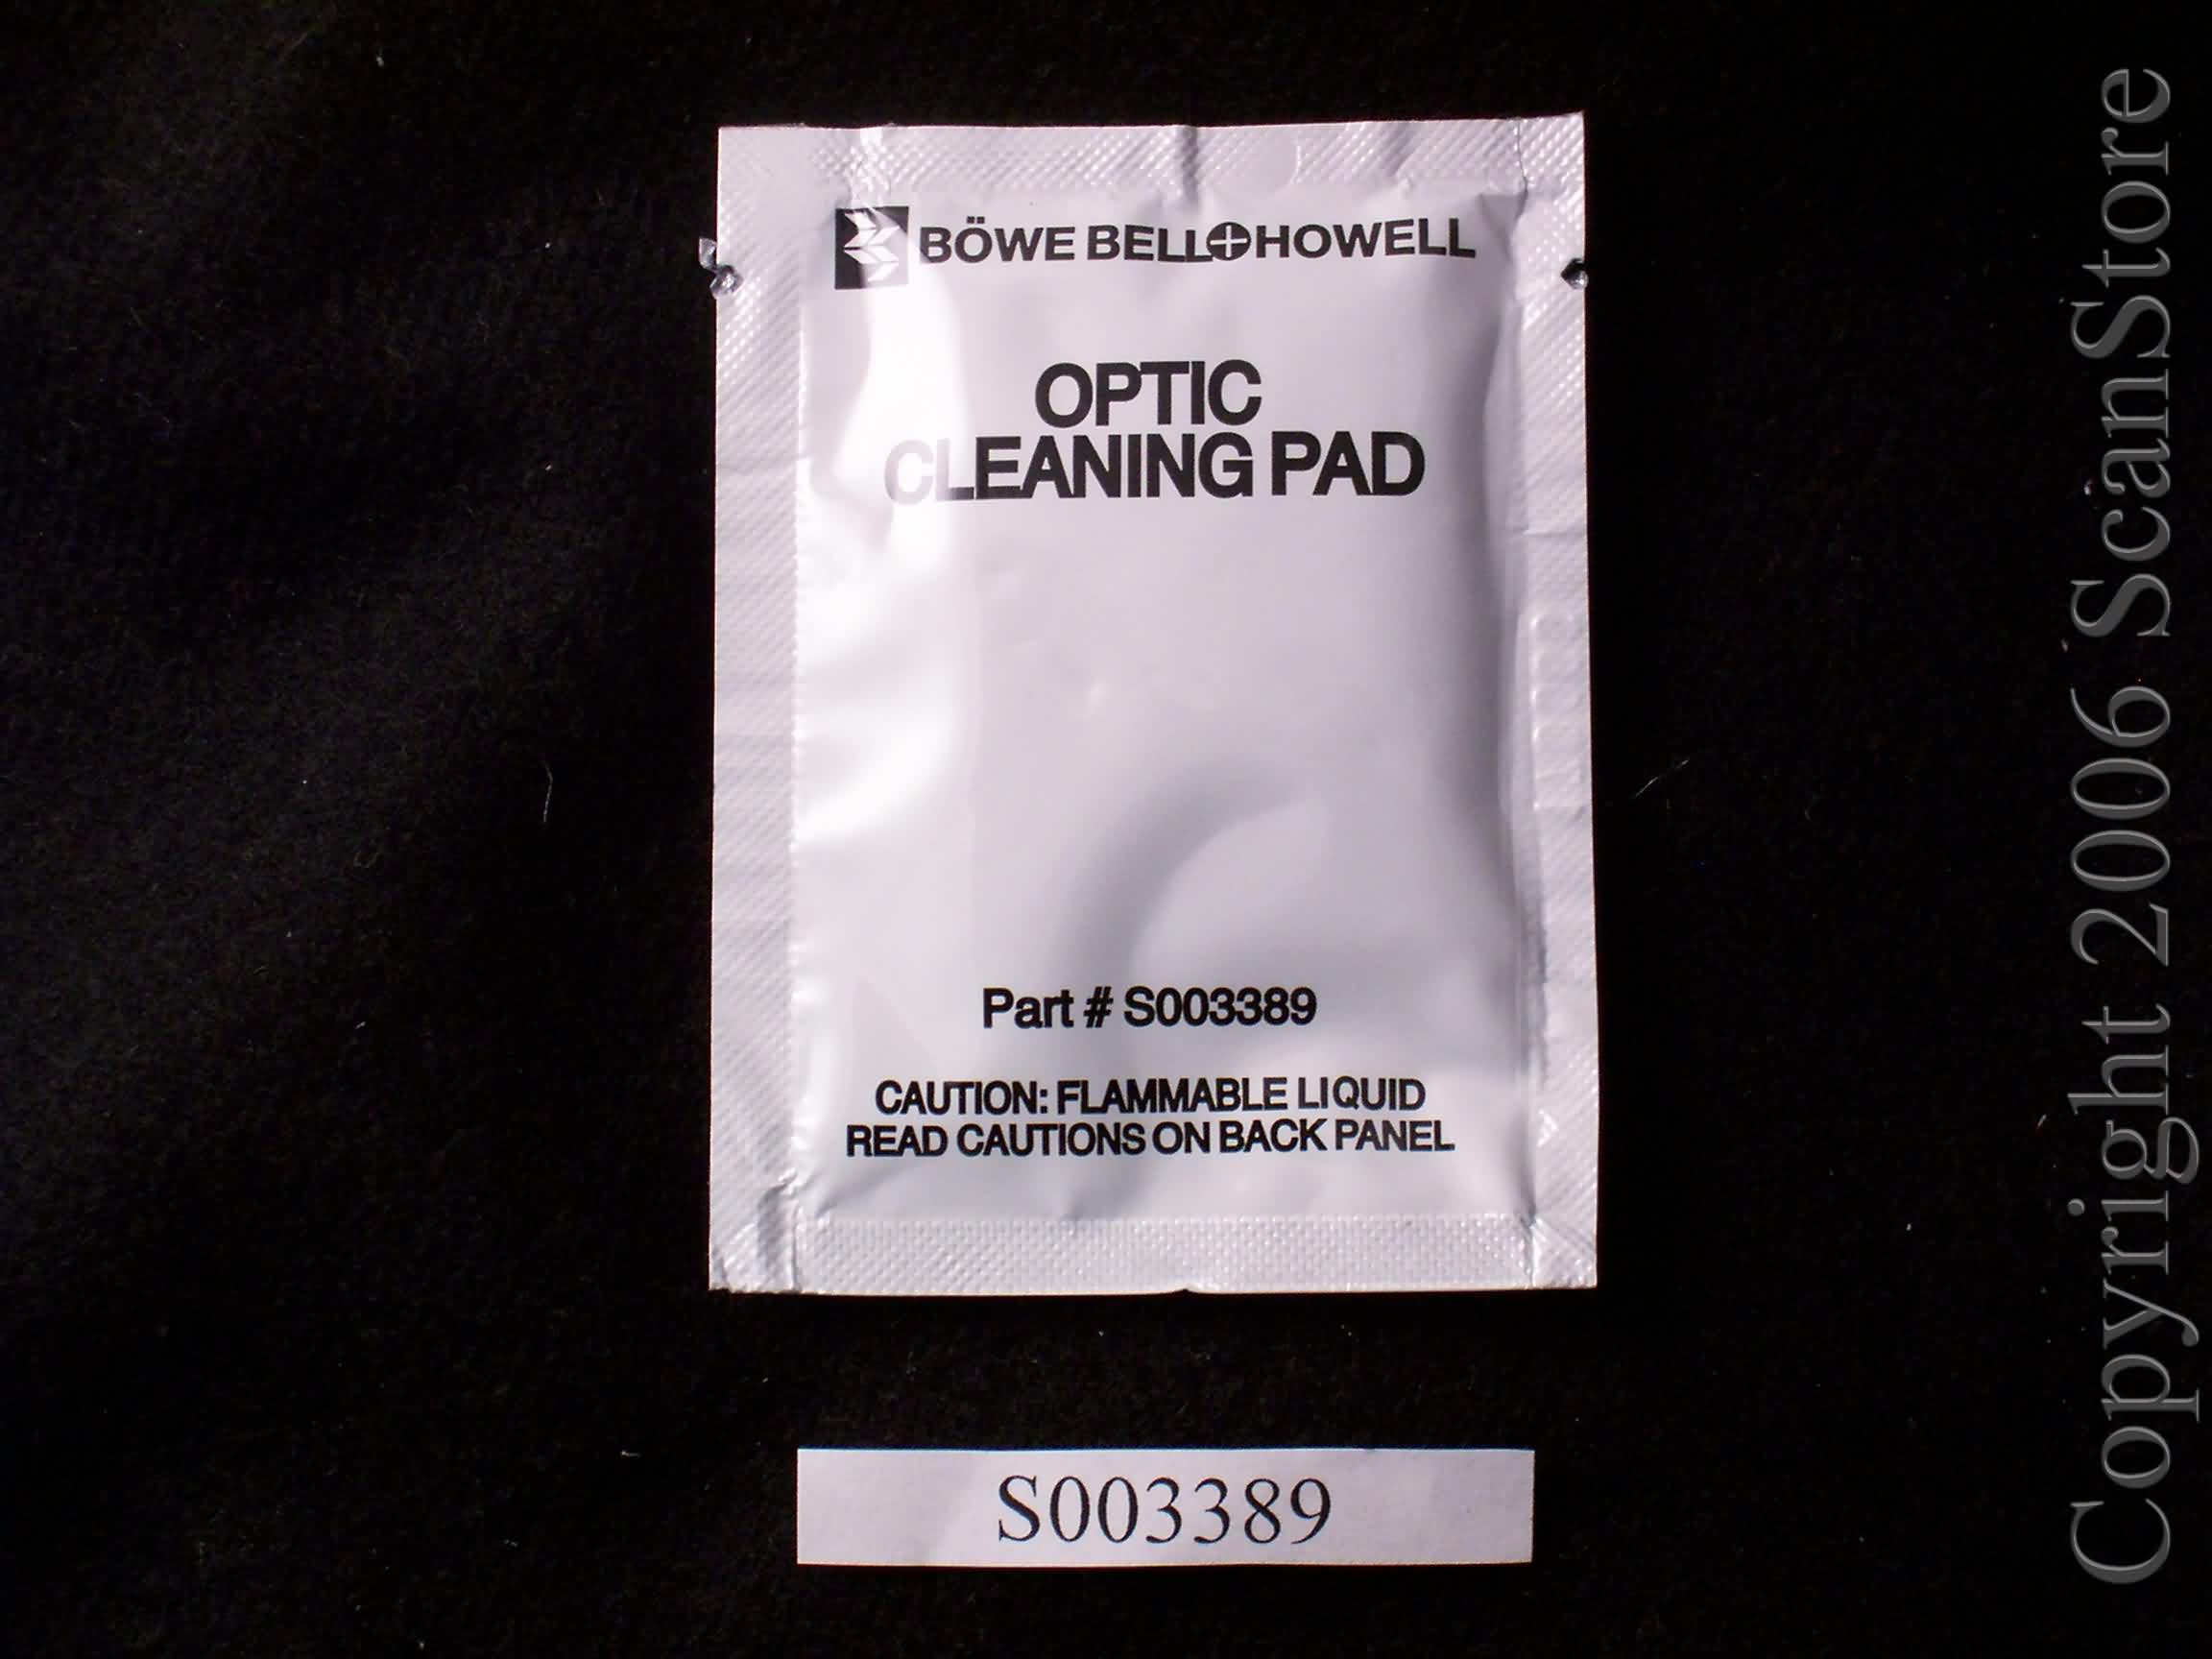 Bell & Howell (Kodak) Optic Cleaning Pad for 8000 Series Scanners